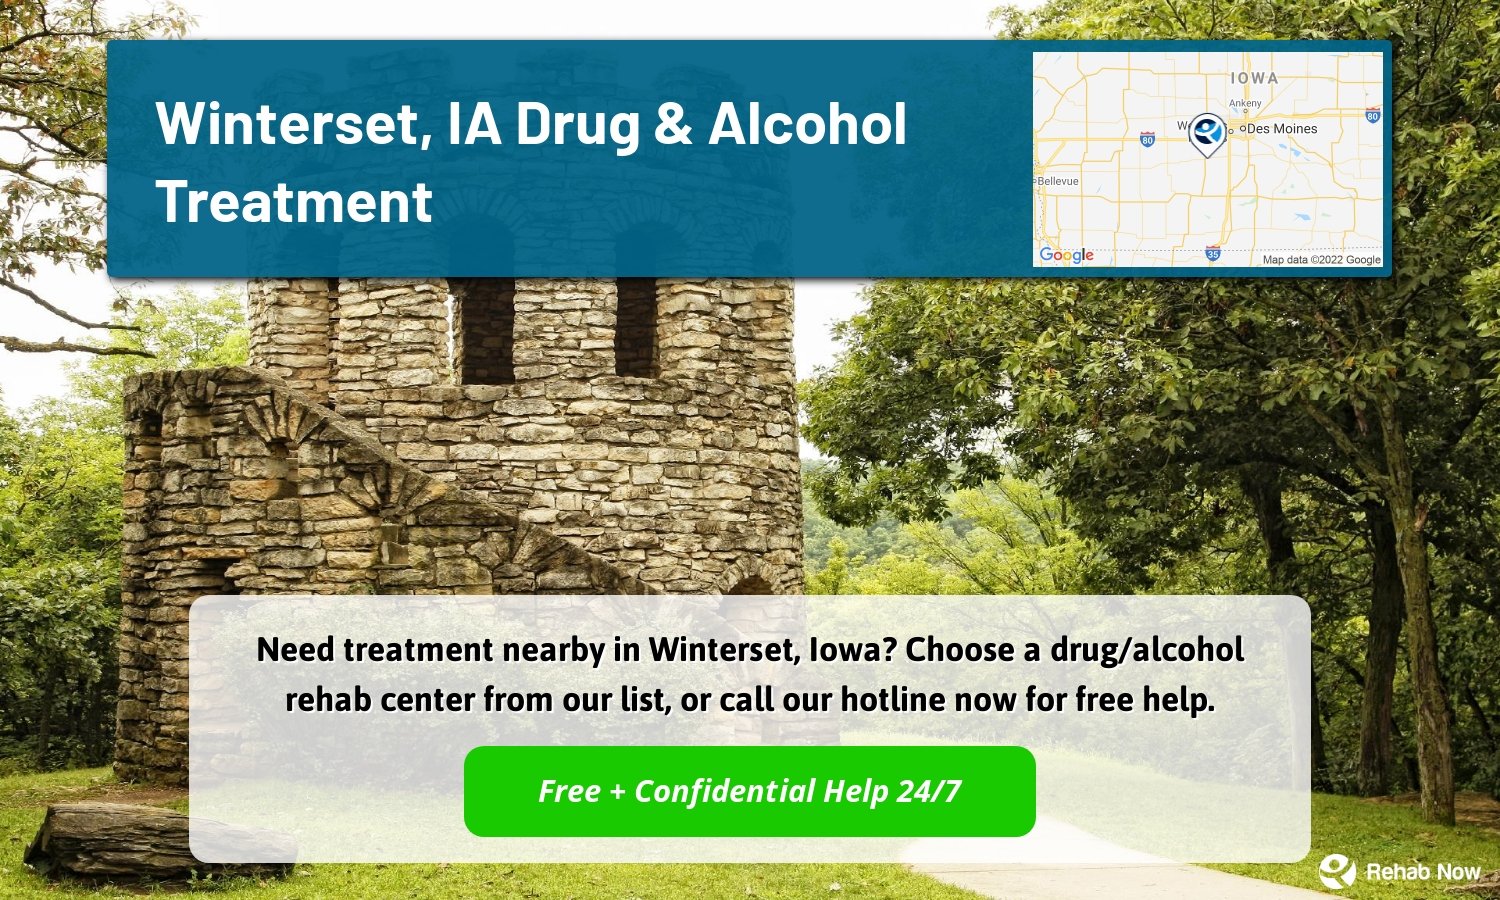 Need treatment nearby in Winterset, Iowa? Choose a drug/alcohol rehab center from our list, or call our hotline now for free help.